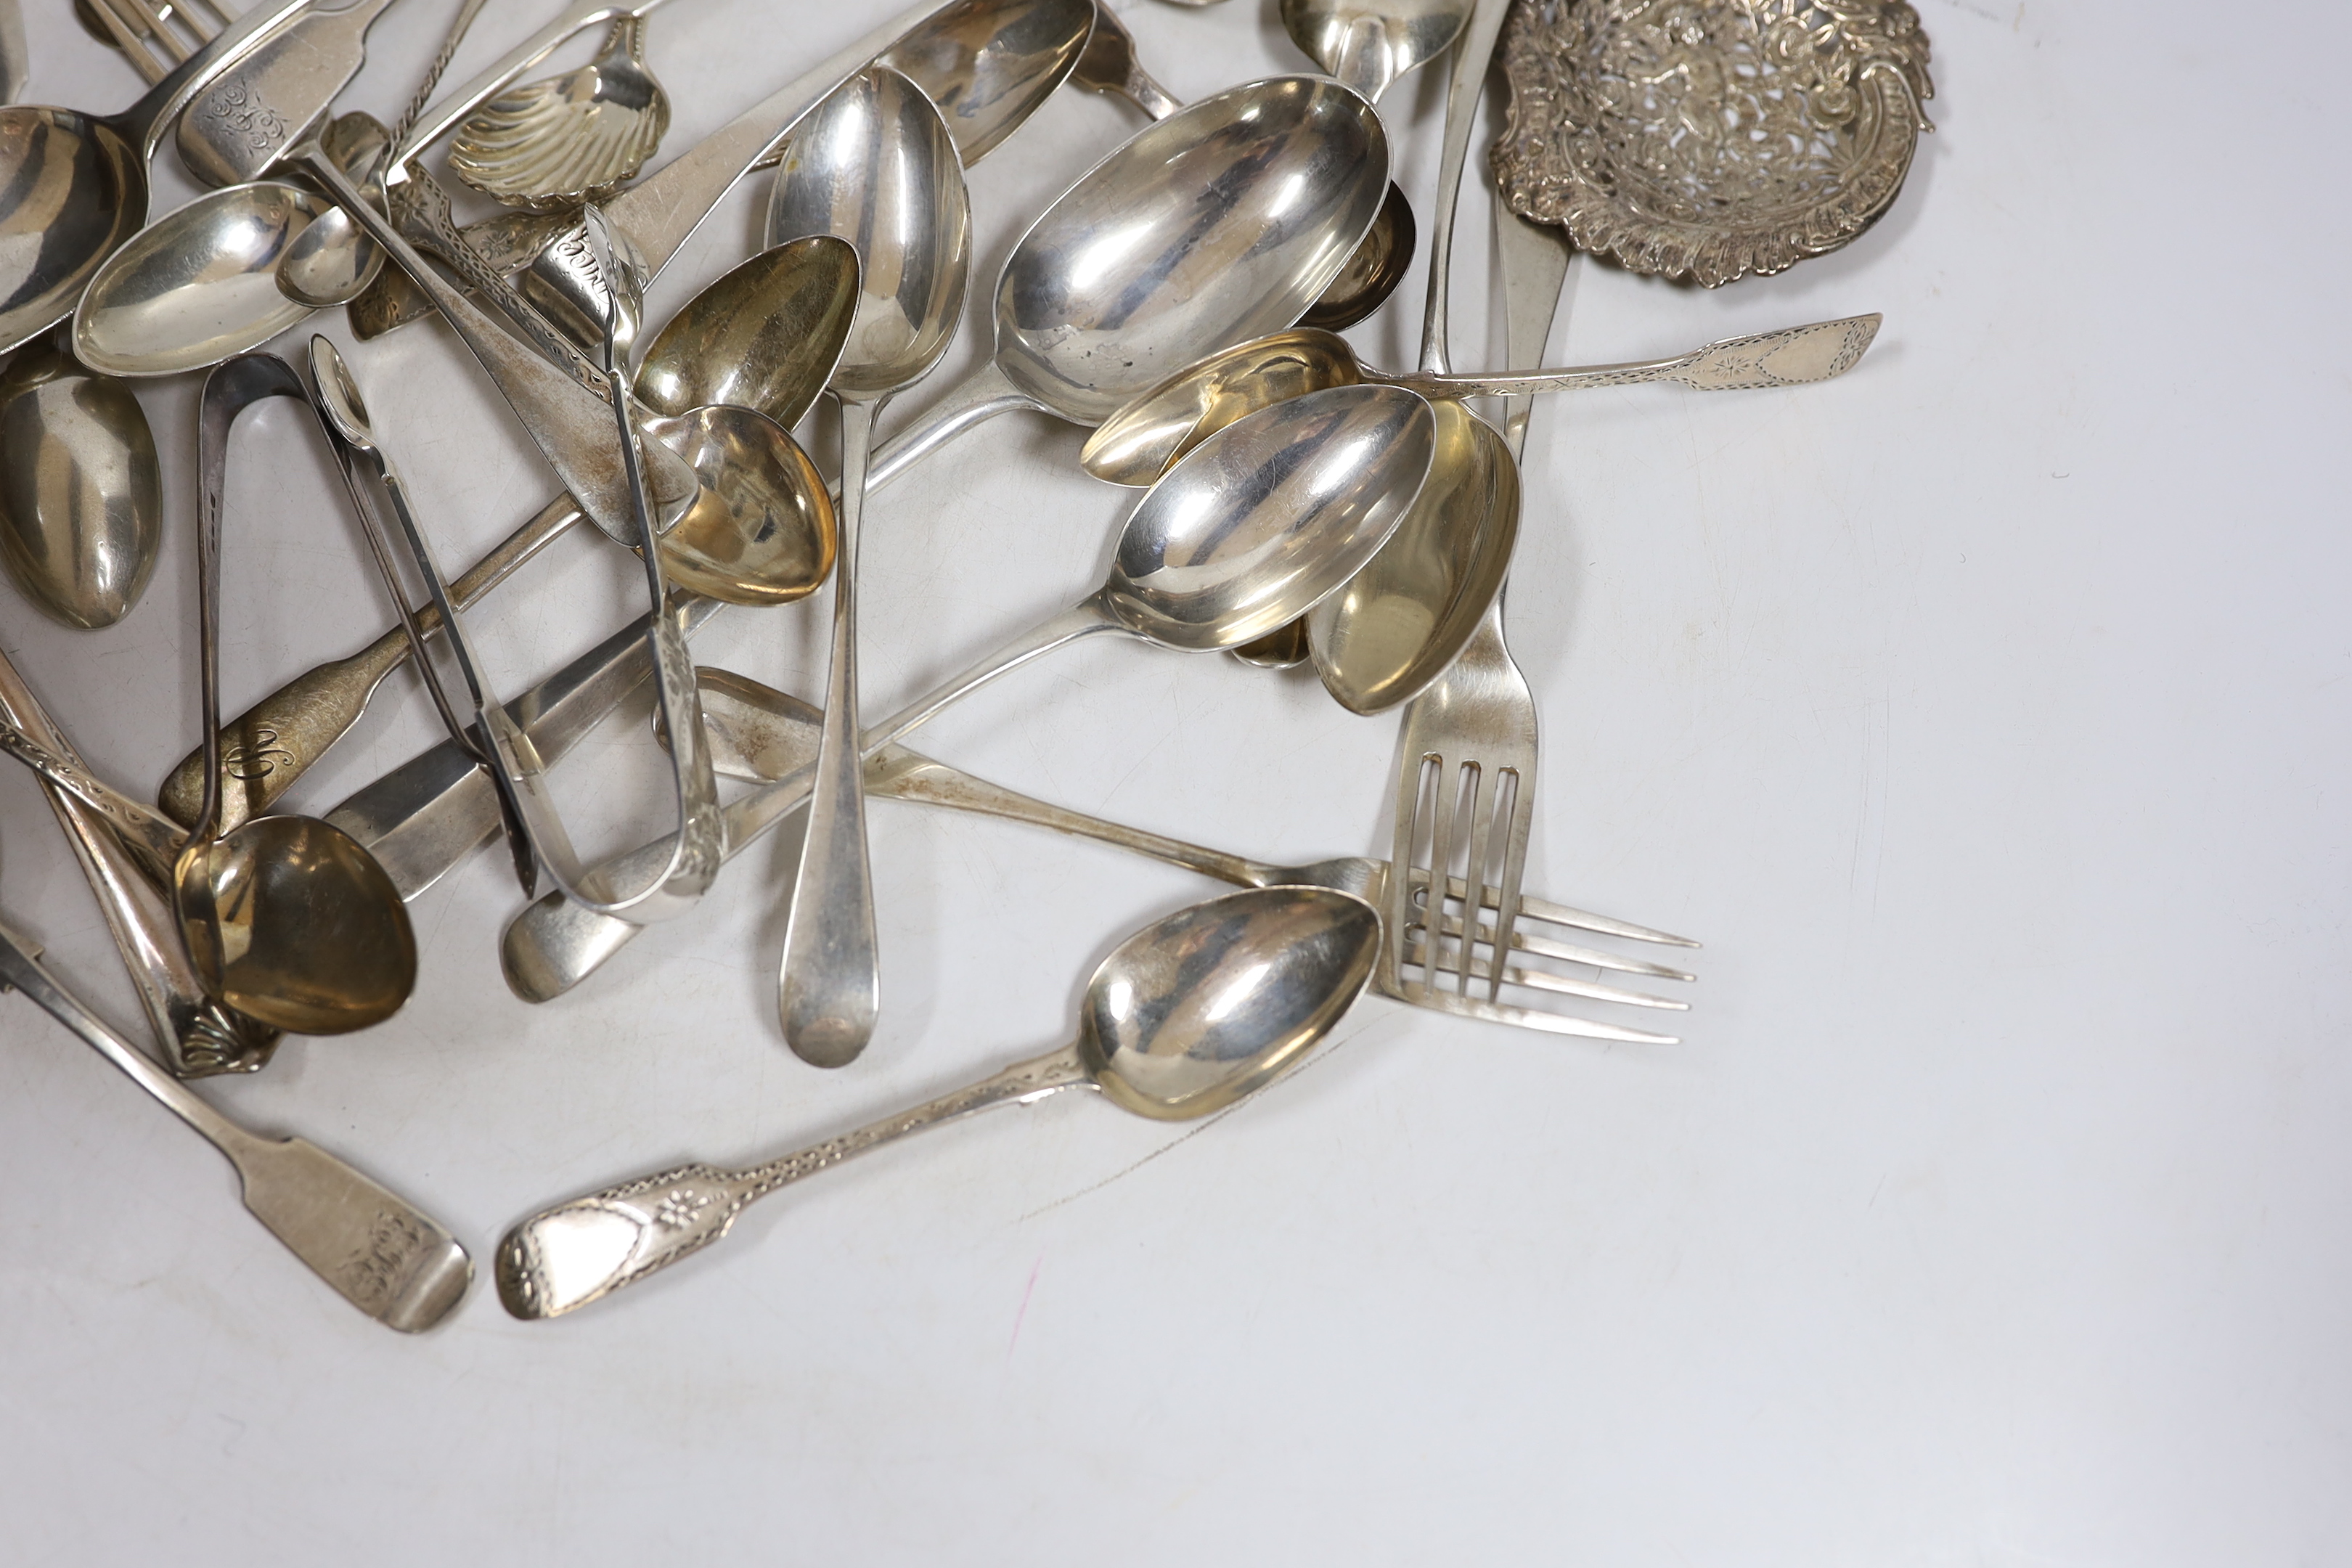 A quantity of assorted 19th century and later silver flatware, various patterns, dates and makers, including a set of silver bright cut engraved fiddle pattern teaspoons, 1843 and a Newcastle caddy spoon